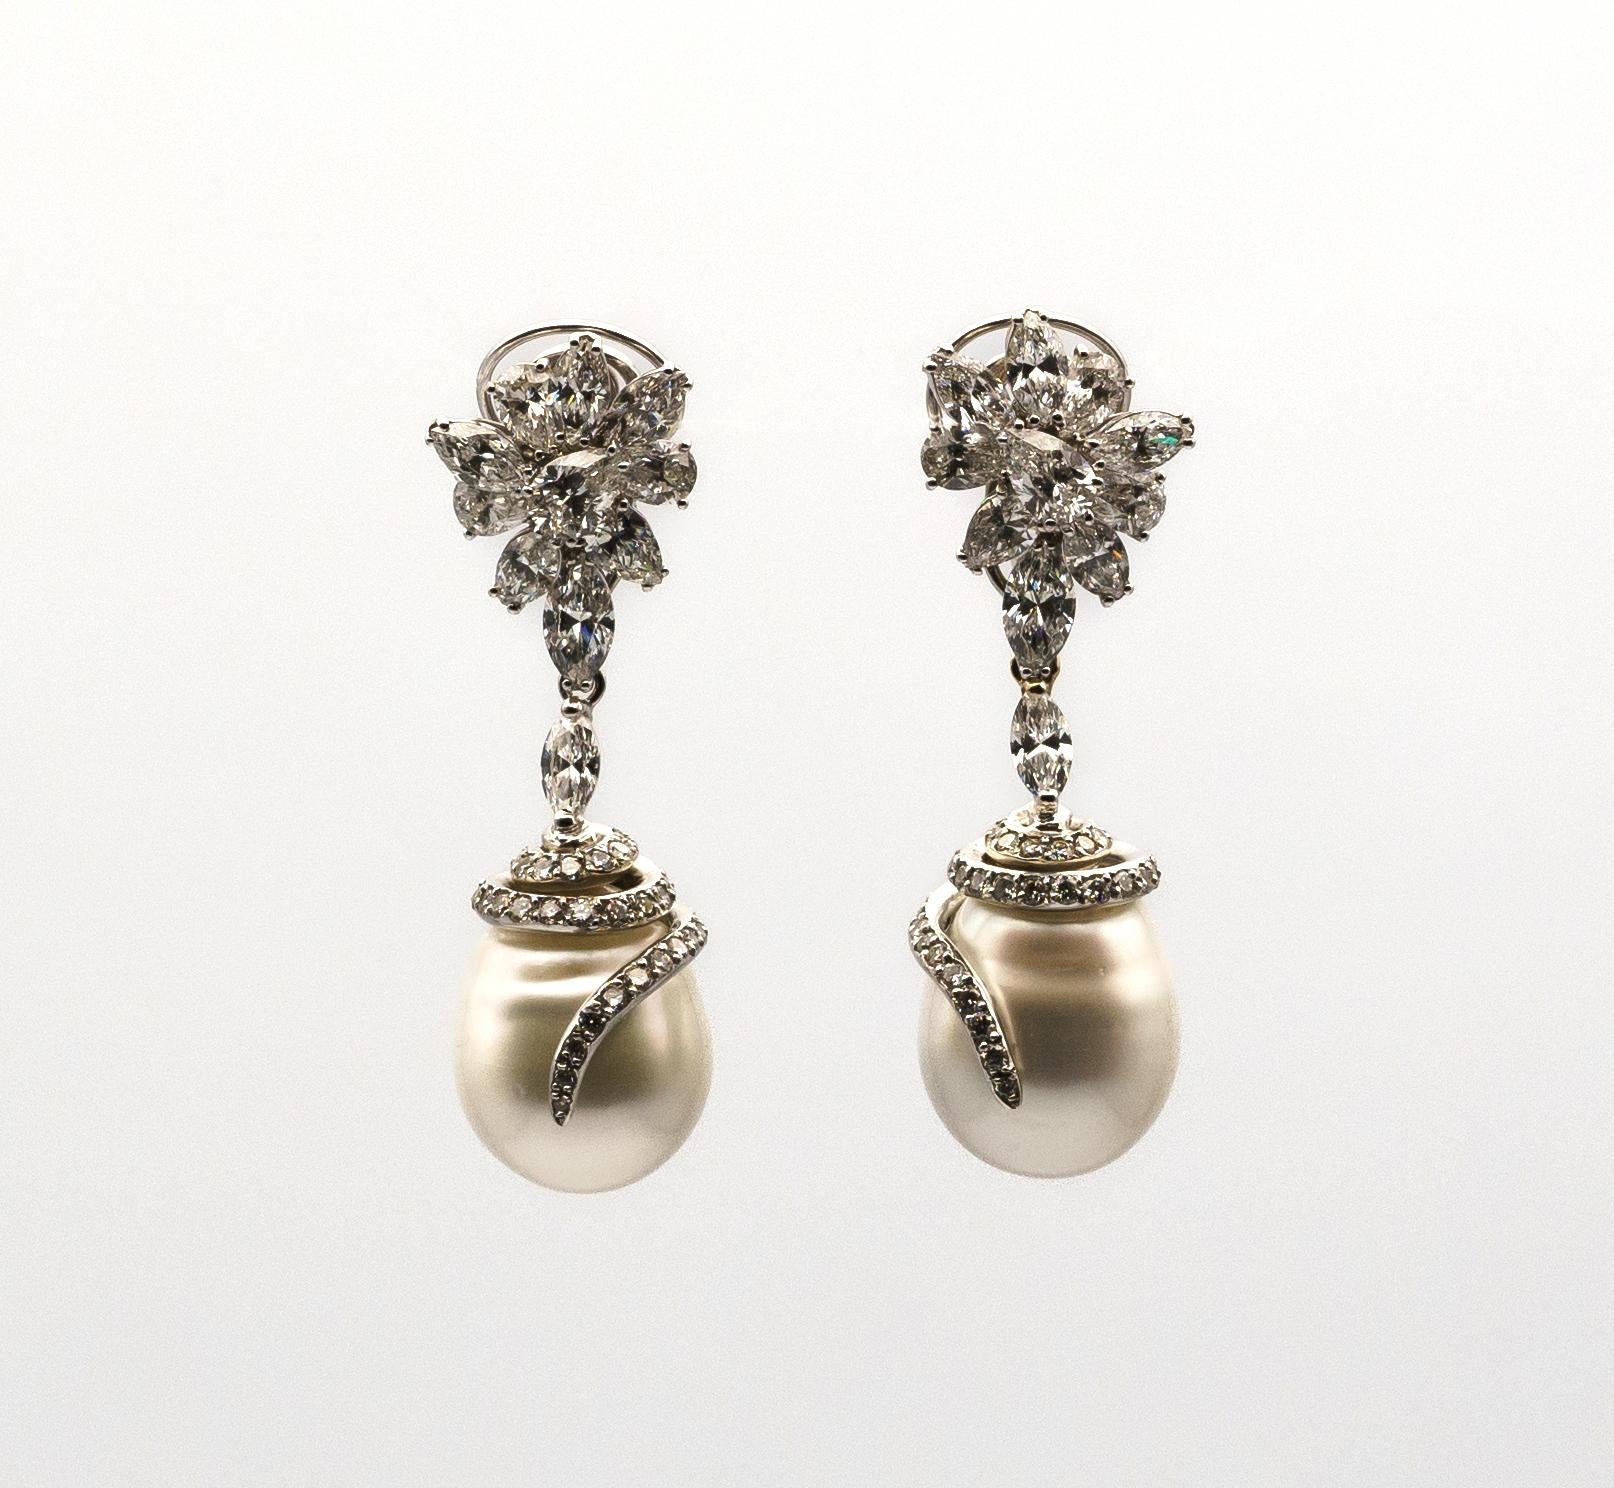 Earrings in white gold set with diamonds, tourmaline, topaze, morganite, pearls For Sale 2